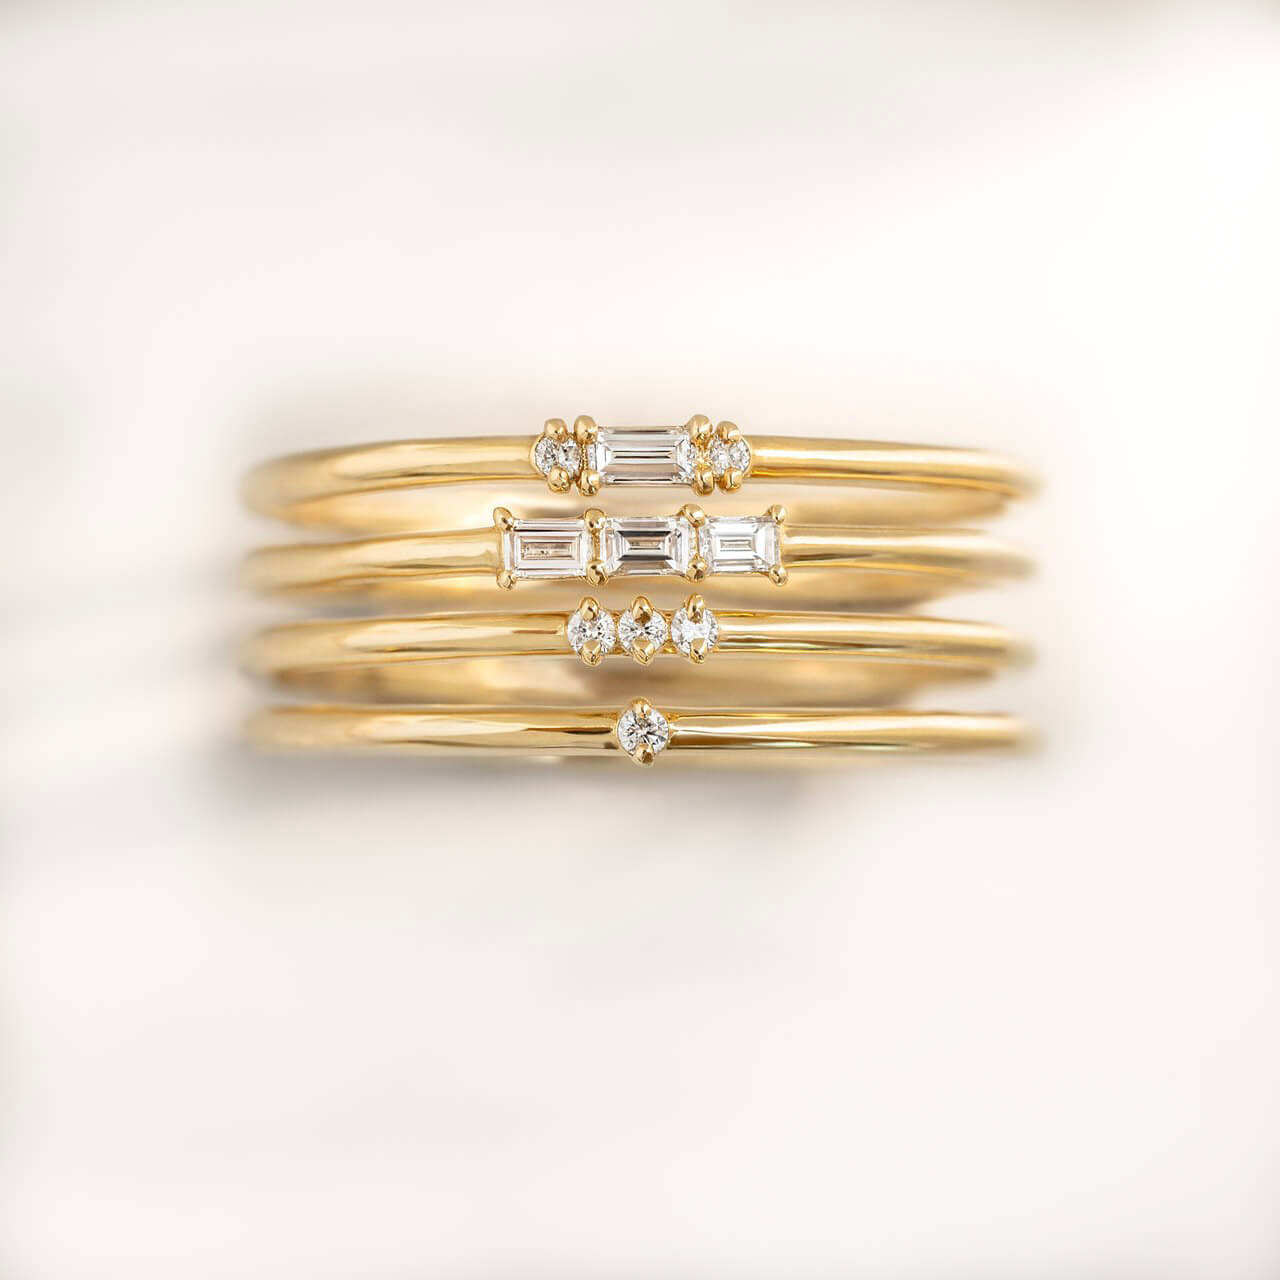 14ct Yellow Gold Patterned Matching Wedding Ring Set | Our Rings & Prices |  Smooch